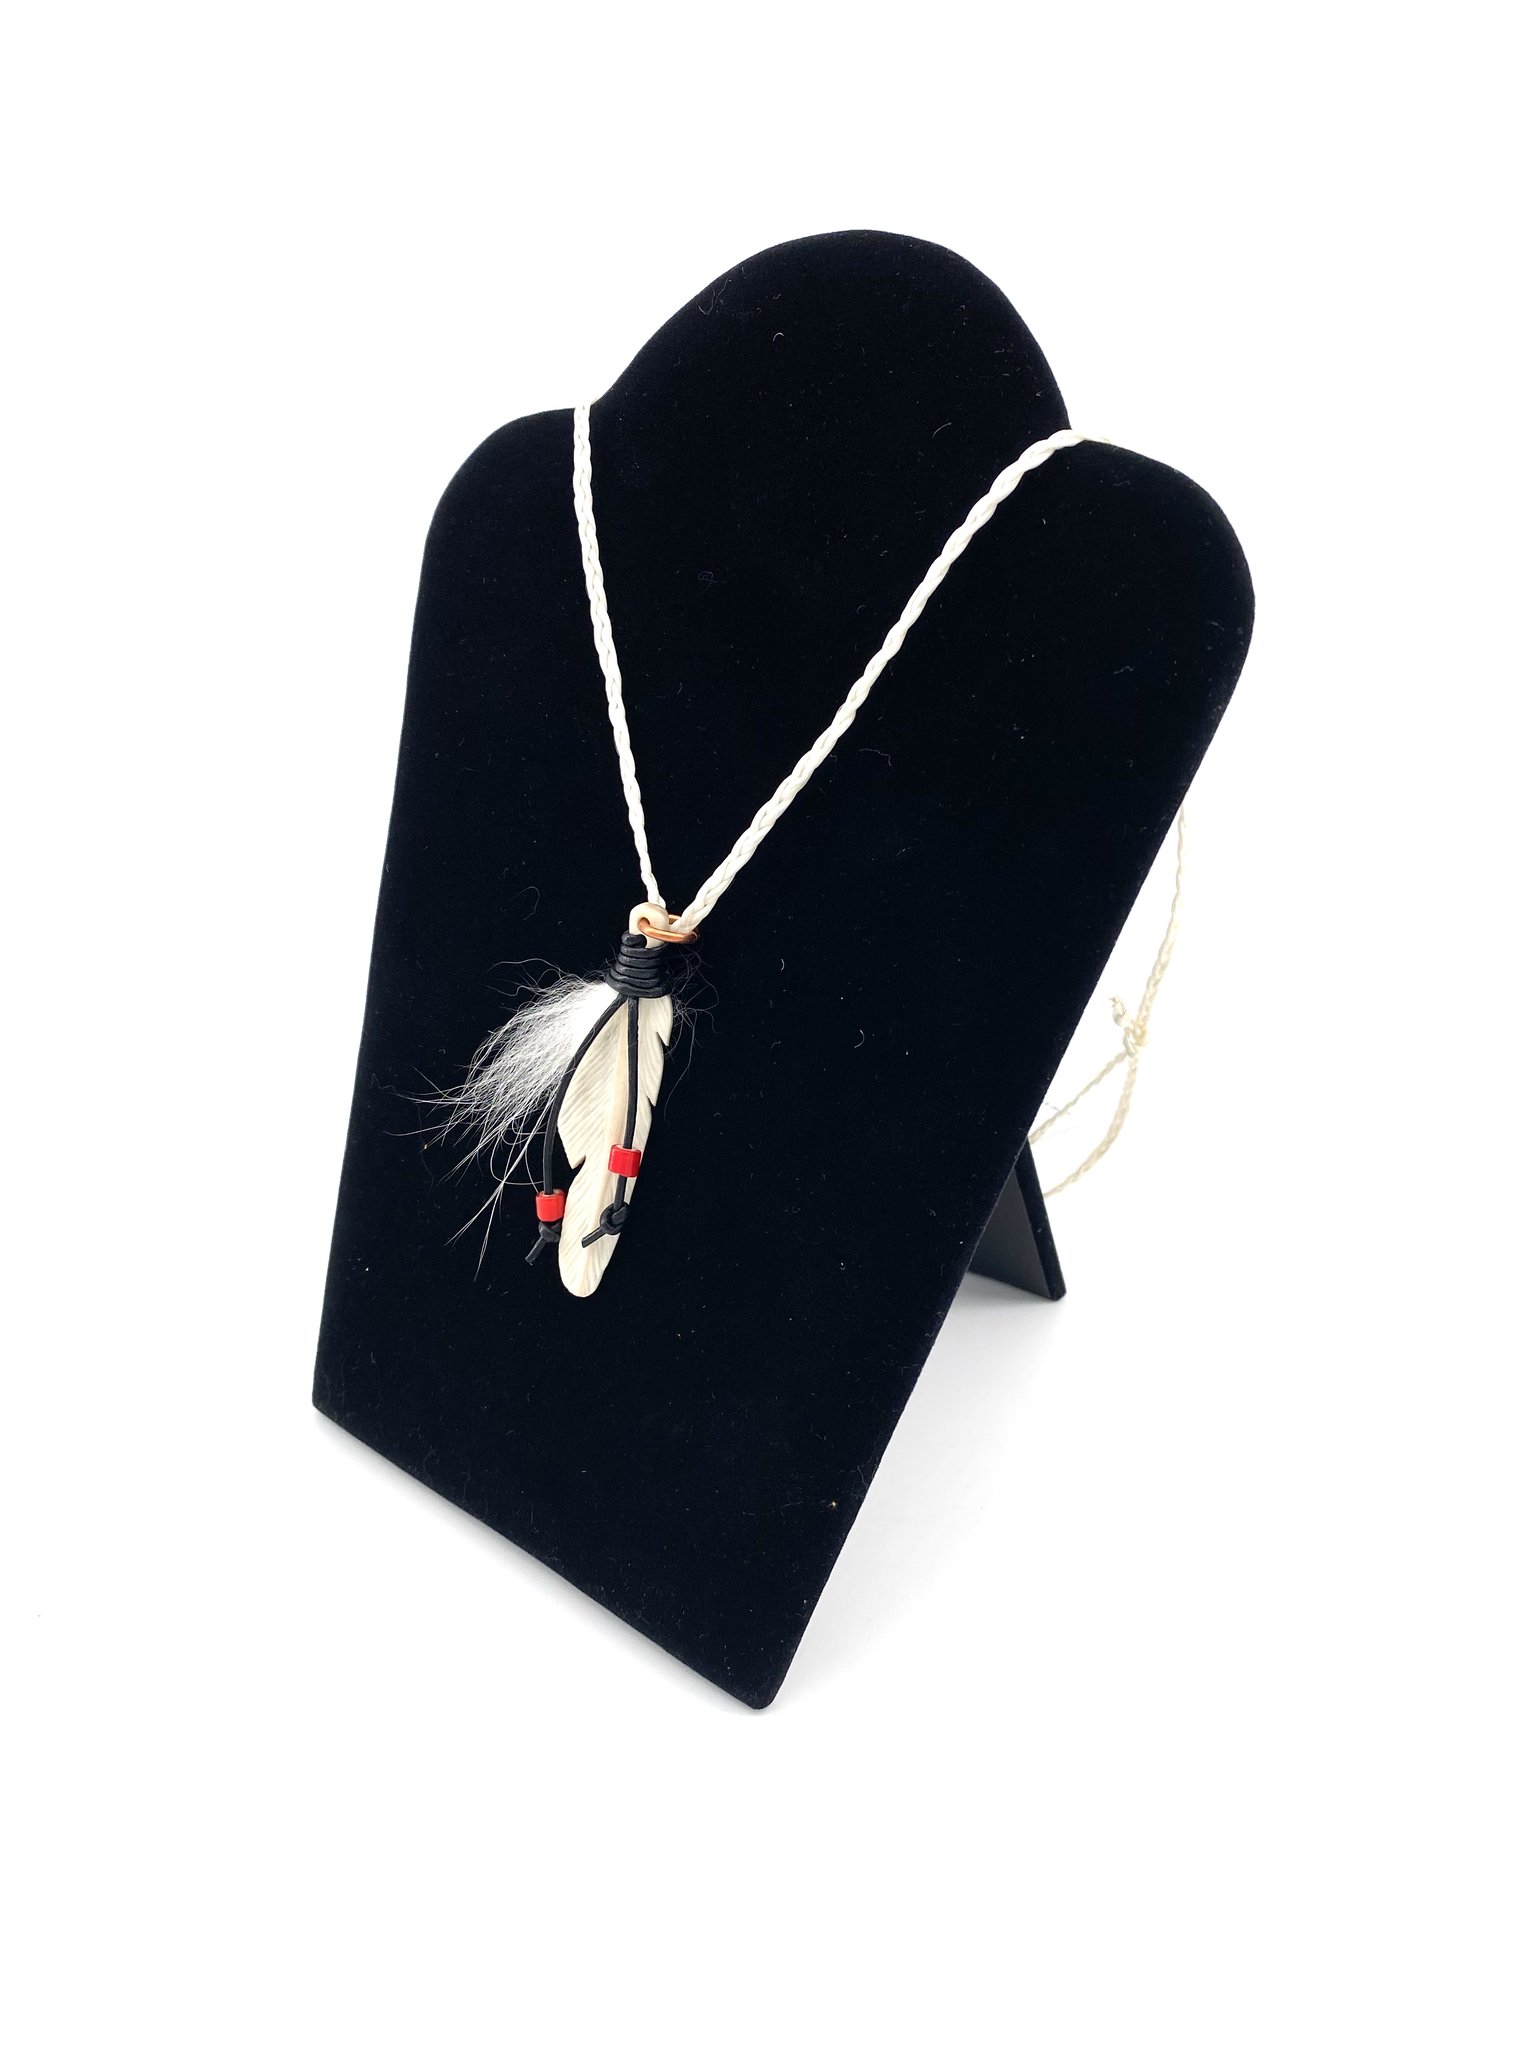 Caribou feather necklace on a black bust